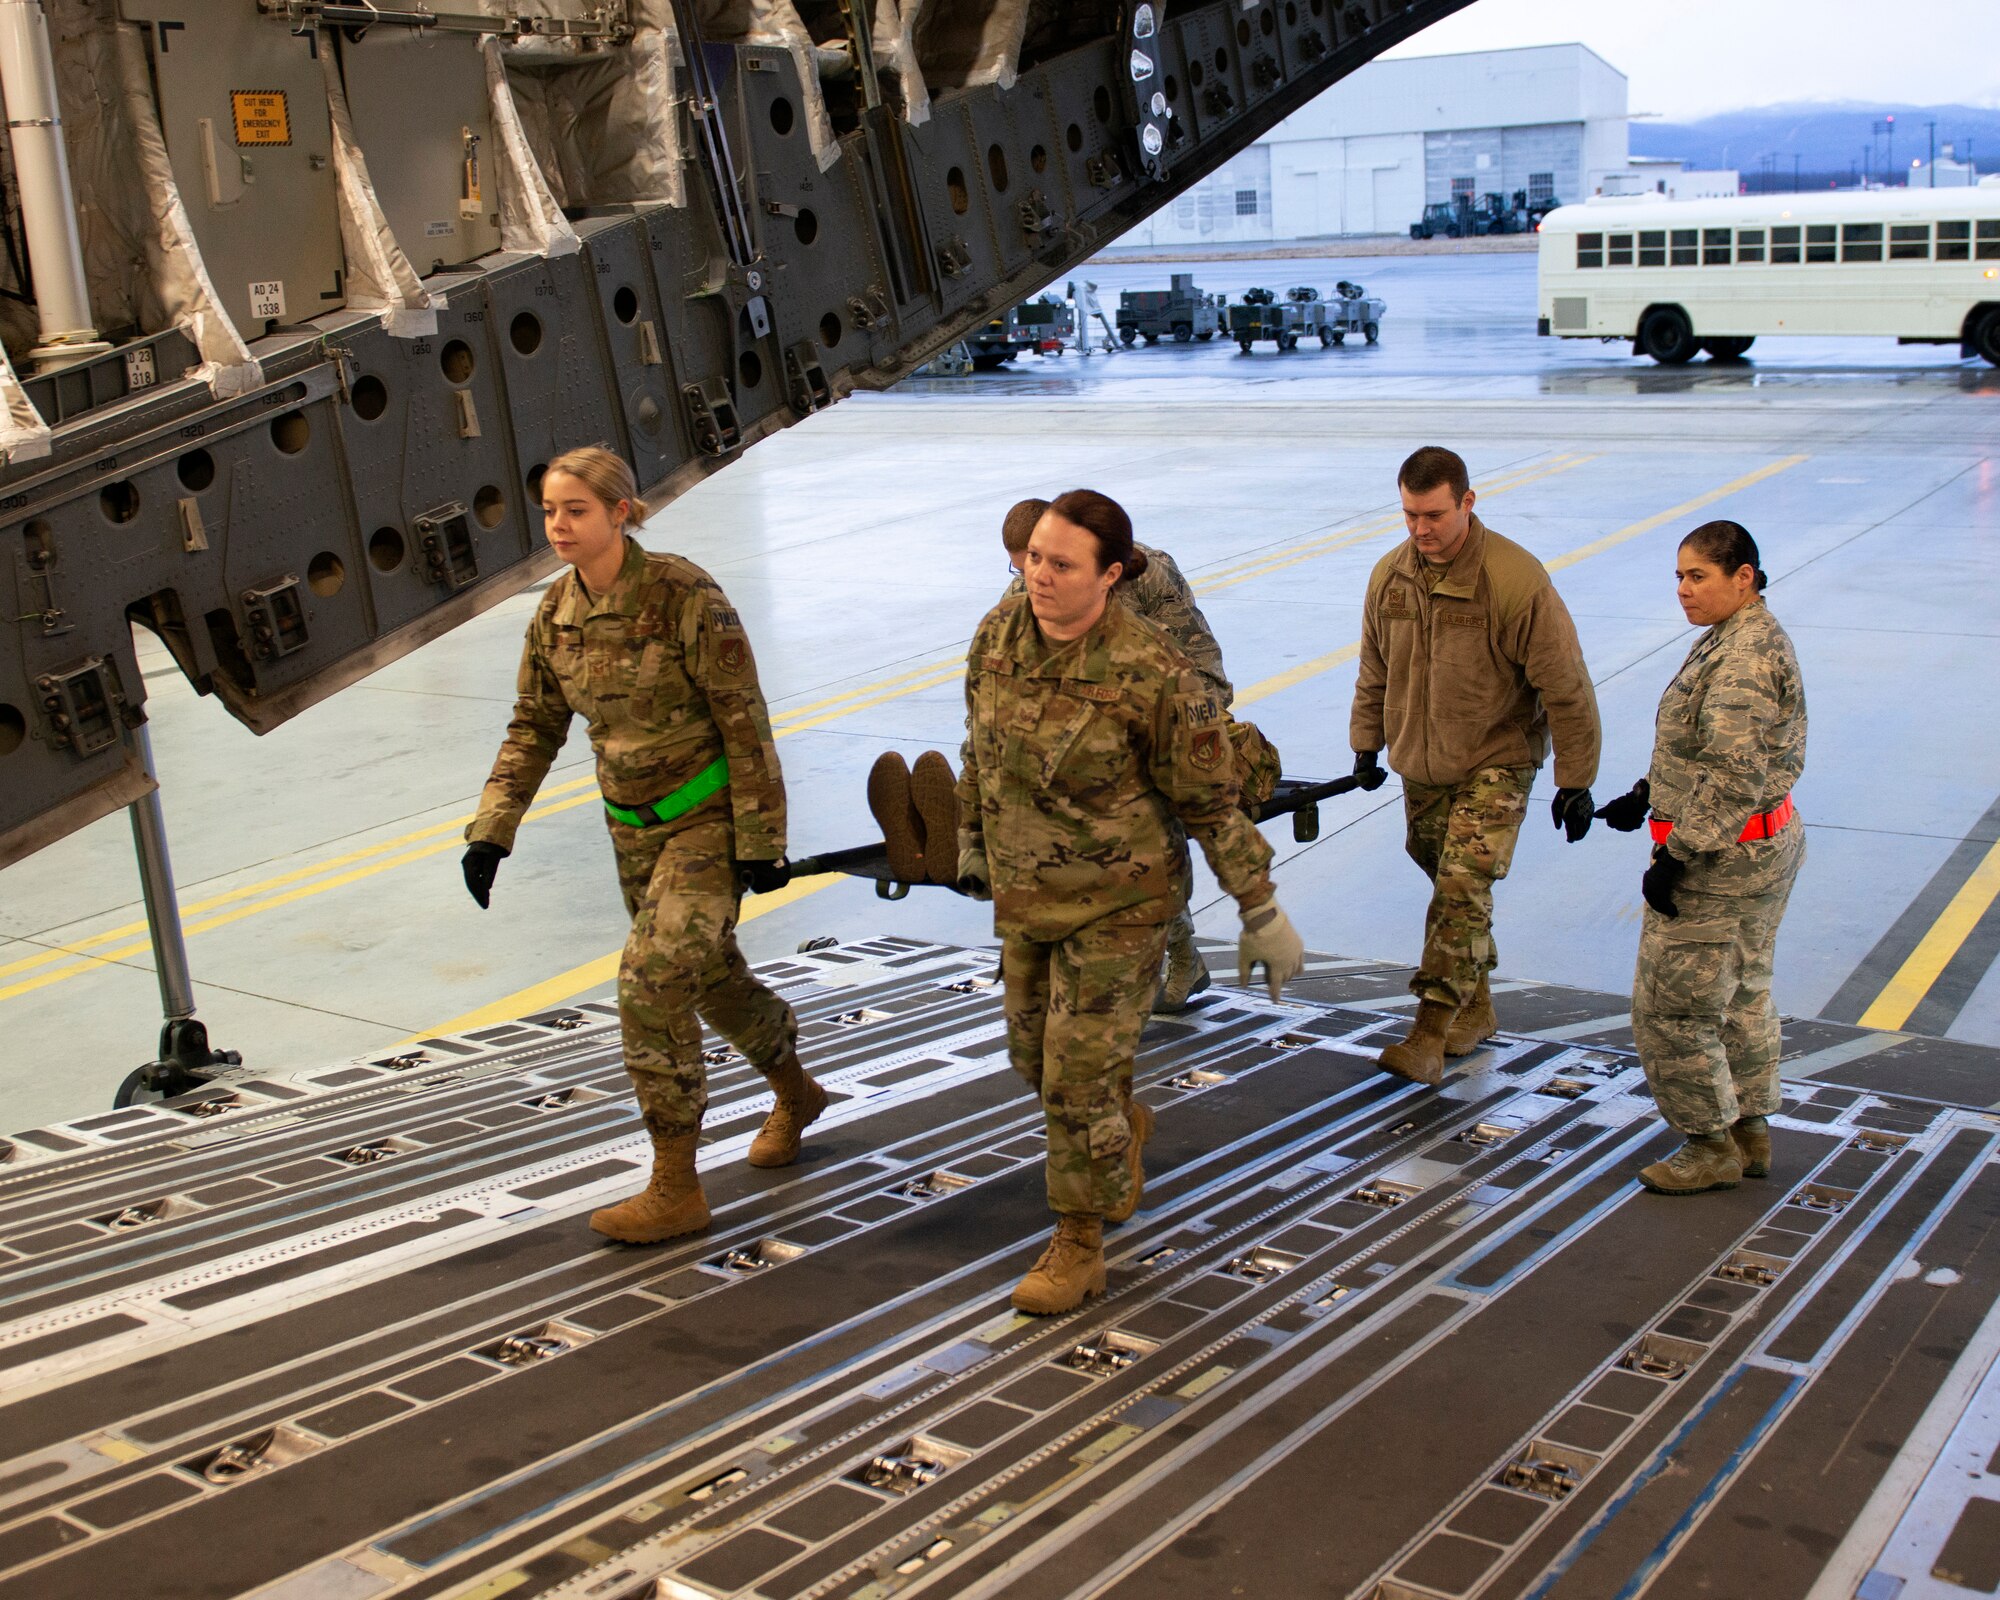 U.S. Airmen with the 673d Medical Group demonstrate loading a patient into a U.S. Air Force C-17 Globemaster III during a 673d Medical Group Provider Open House at Joint Base Elmendorf-Richardson, Alaska, Oct. 24, 2019. The event was held to strengthen partnerships between medical providers on and off of the installation